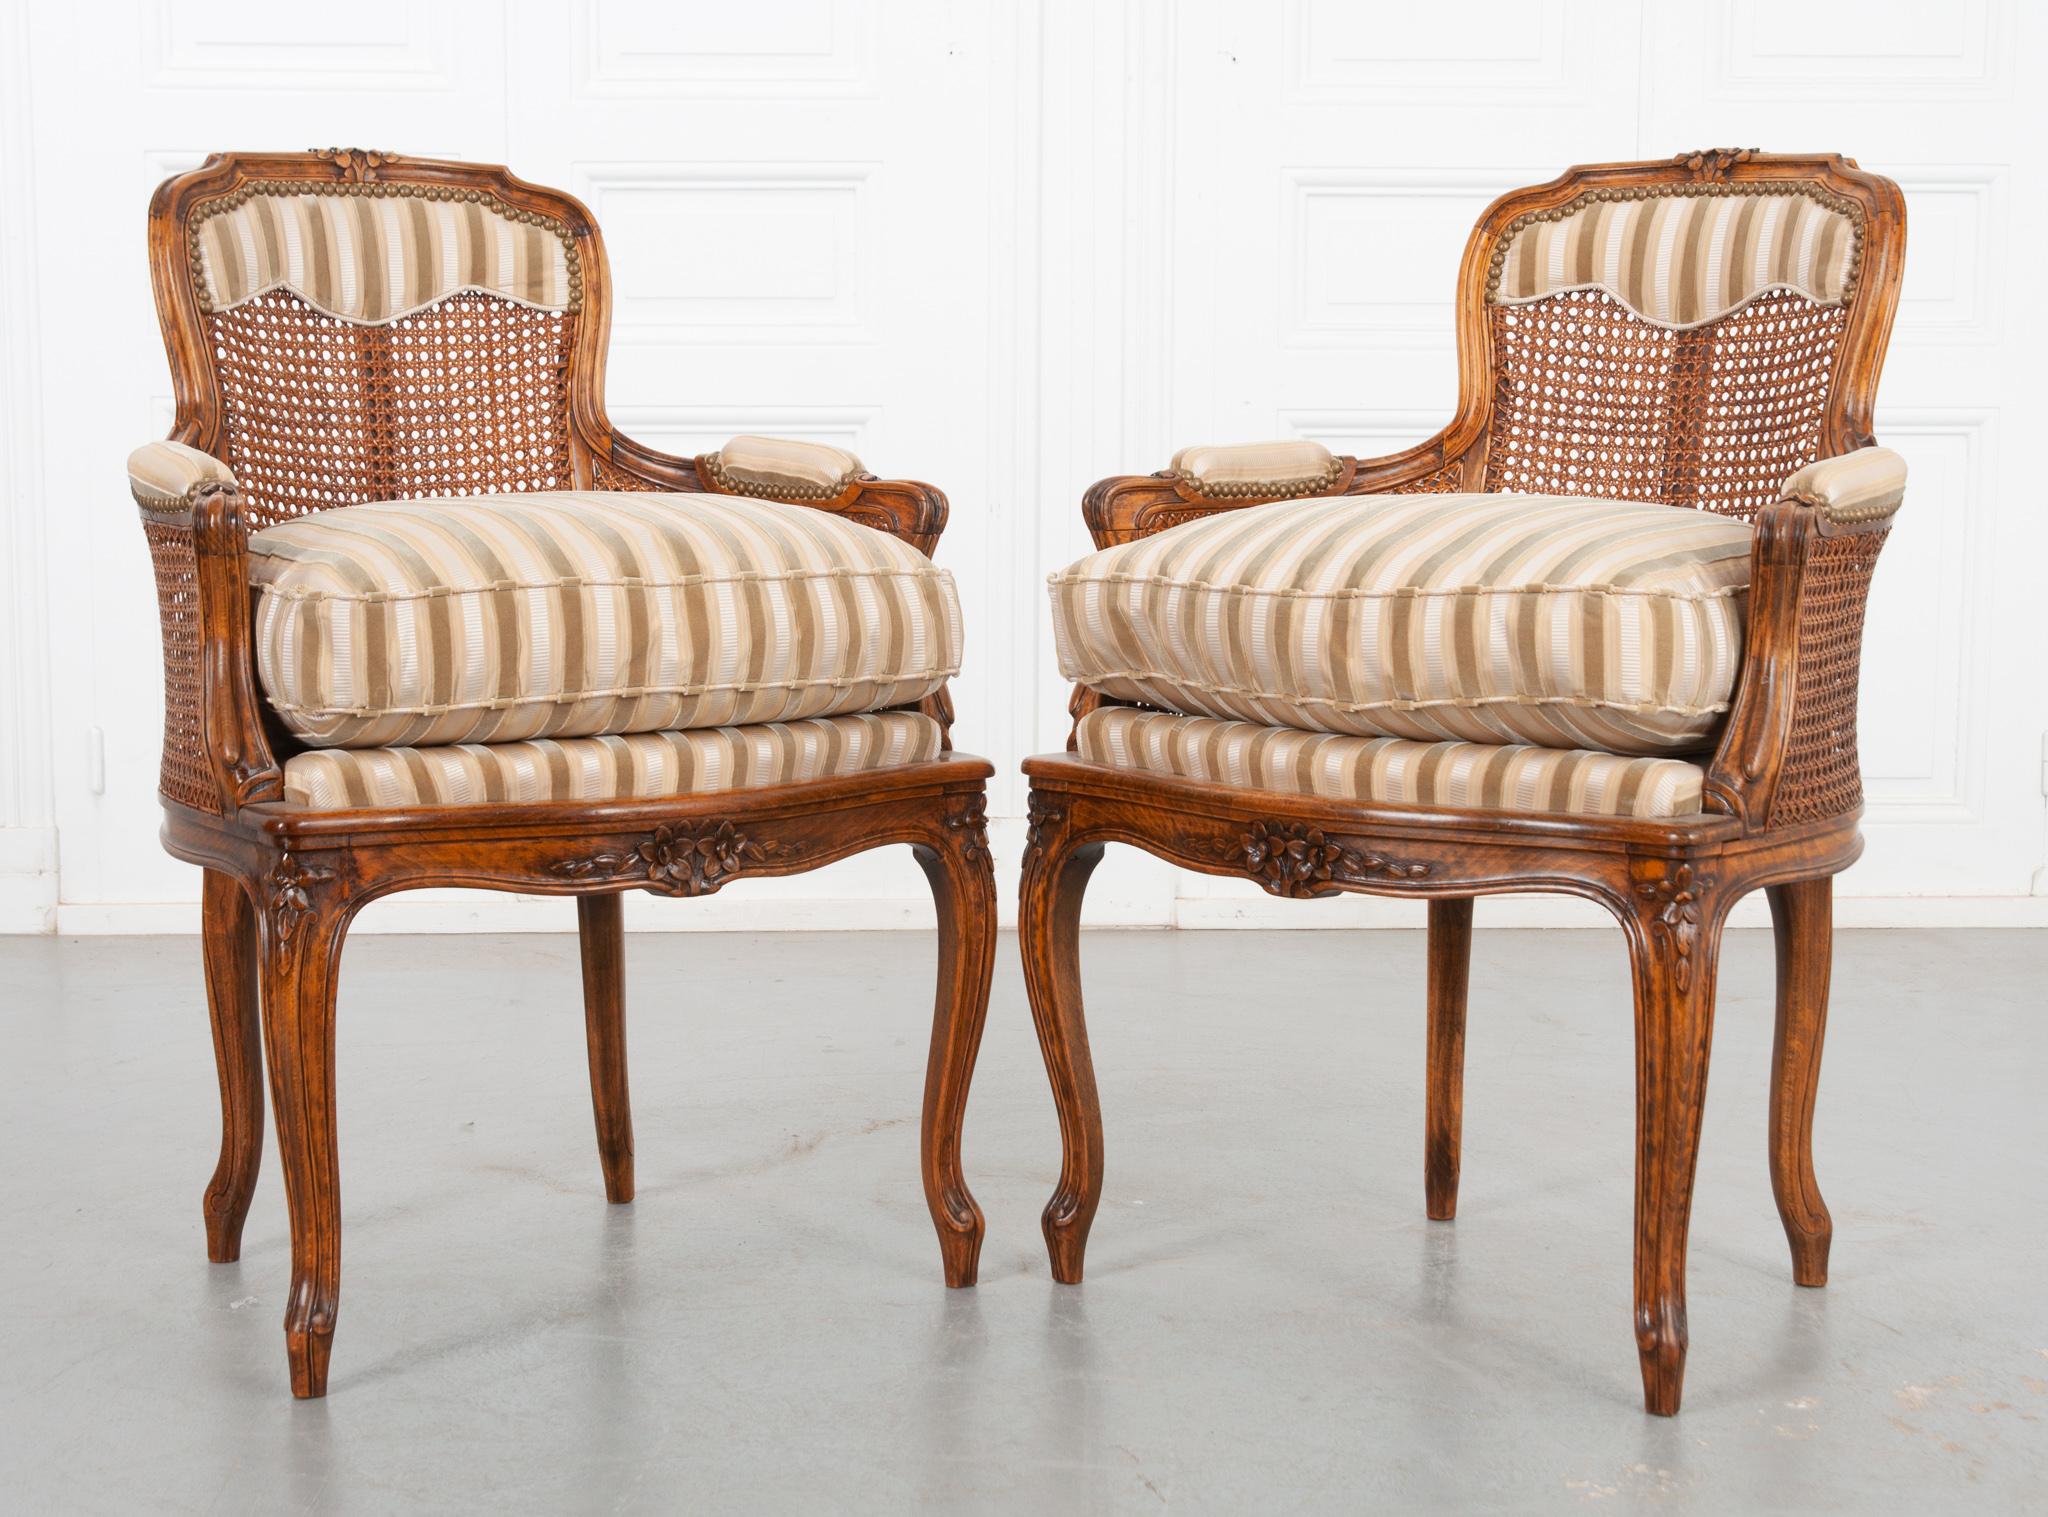 A pair of early 20th century Louis XV style oak frame chairs. Recently upholstered with cut silk and velvet fabric, the seat height is 18” without the cushion and 24’’ with the cushion. The caning is in great condition, stained to match the rich